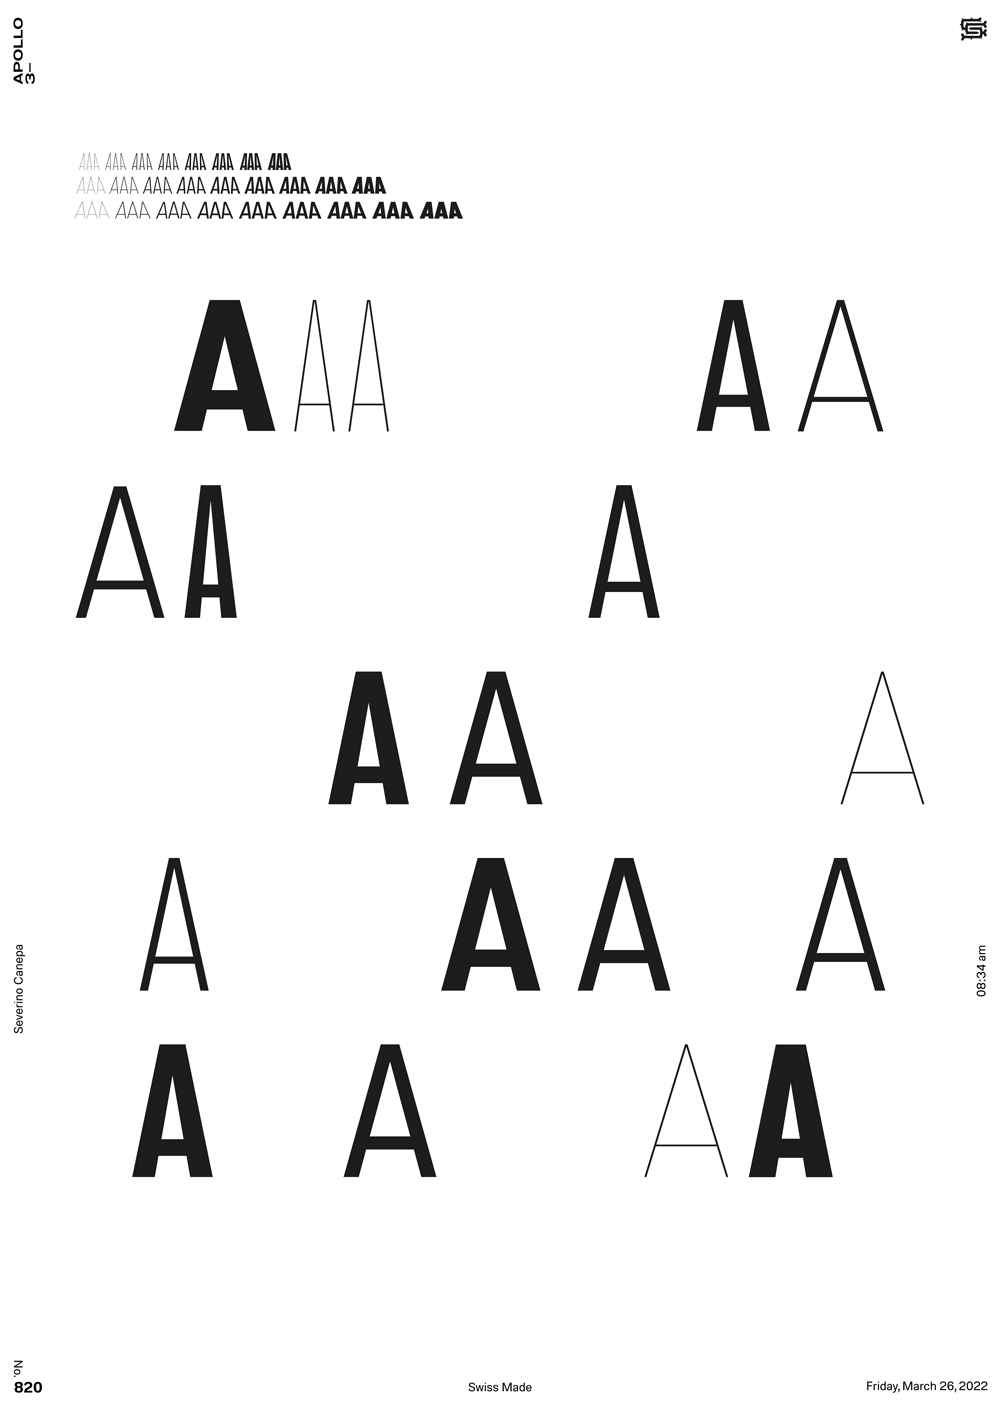 Digital artwork realized with variations of the letter A